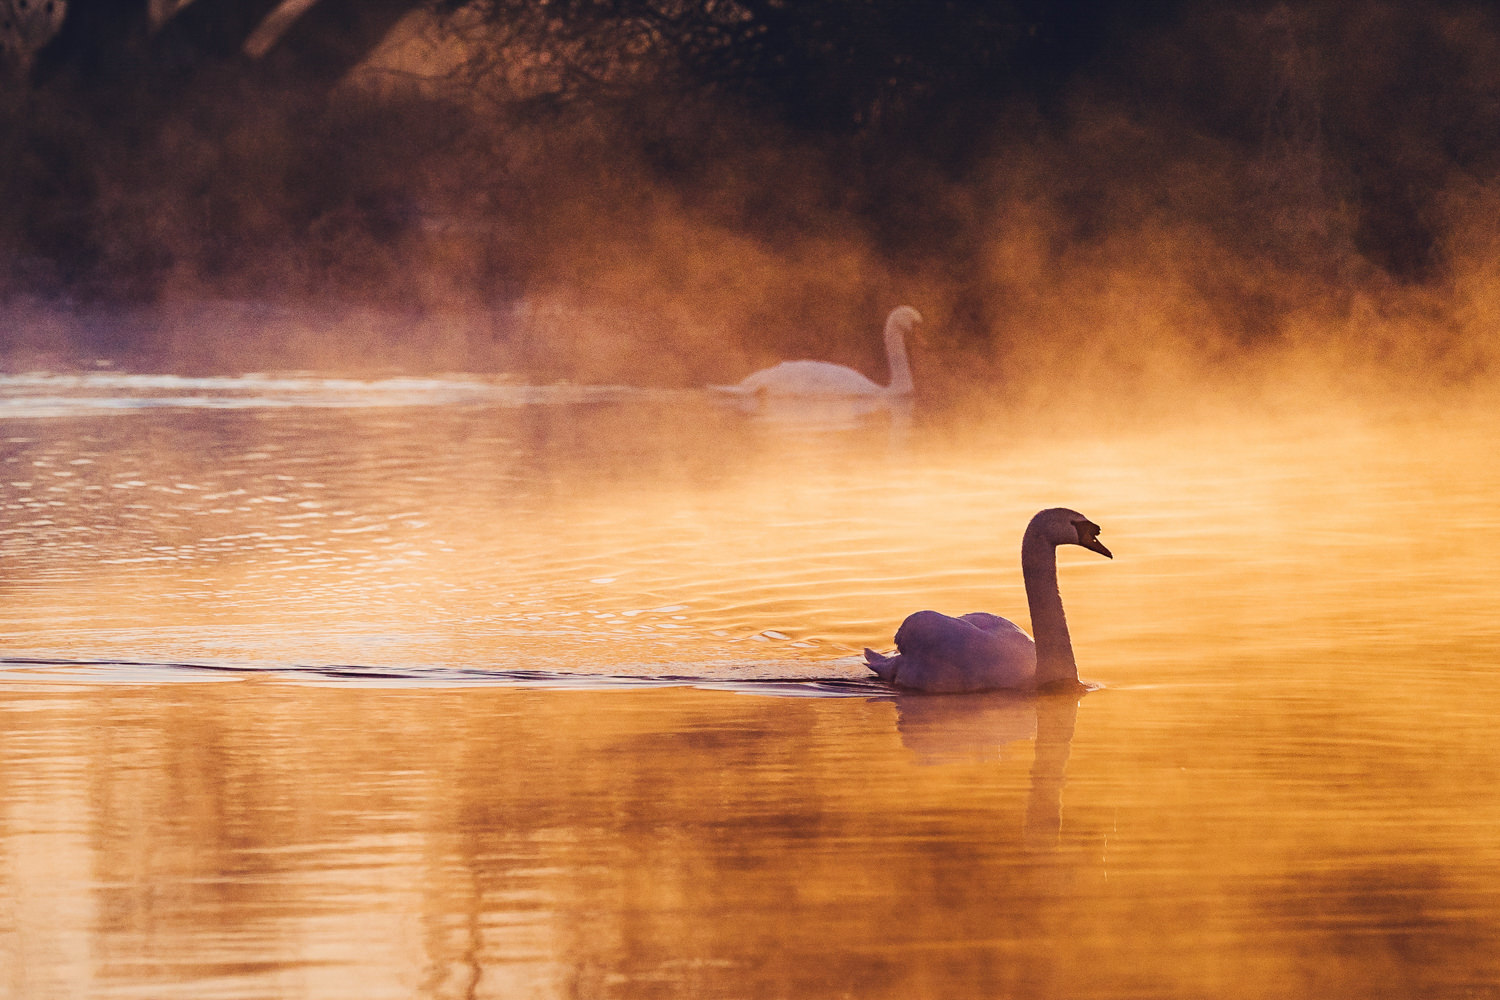 Two swans swimming, one in darker light